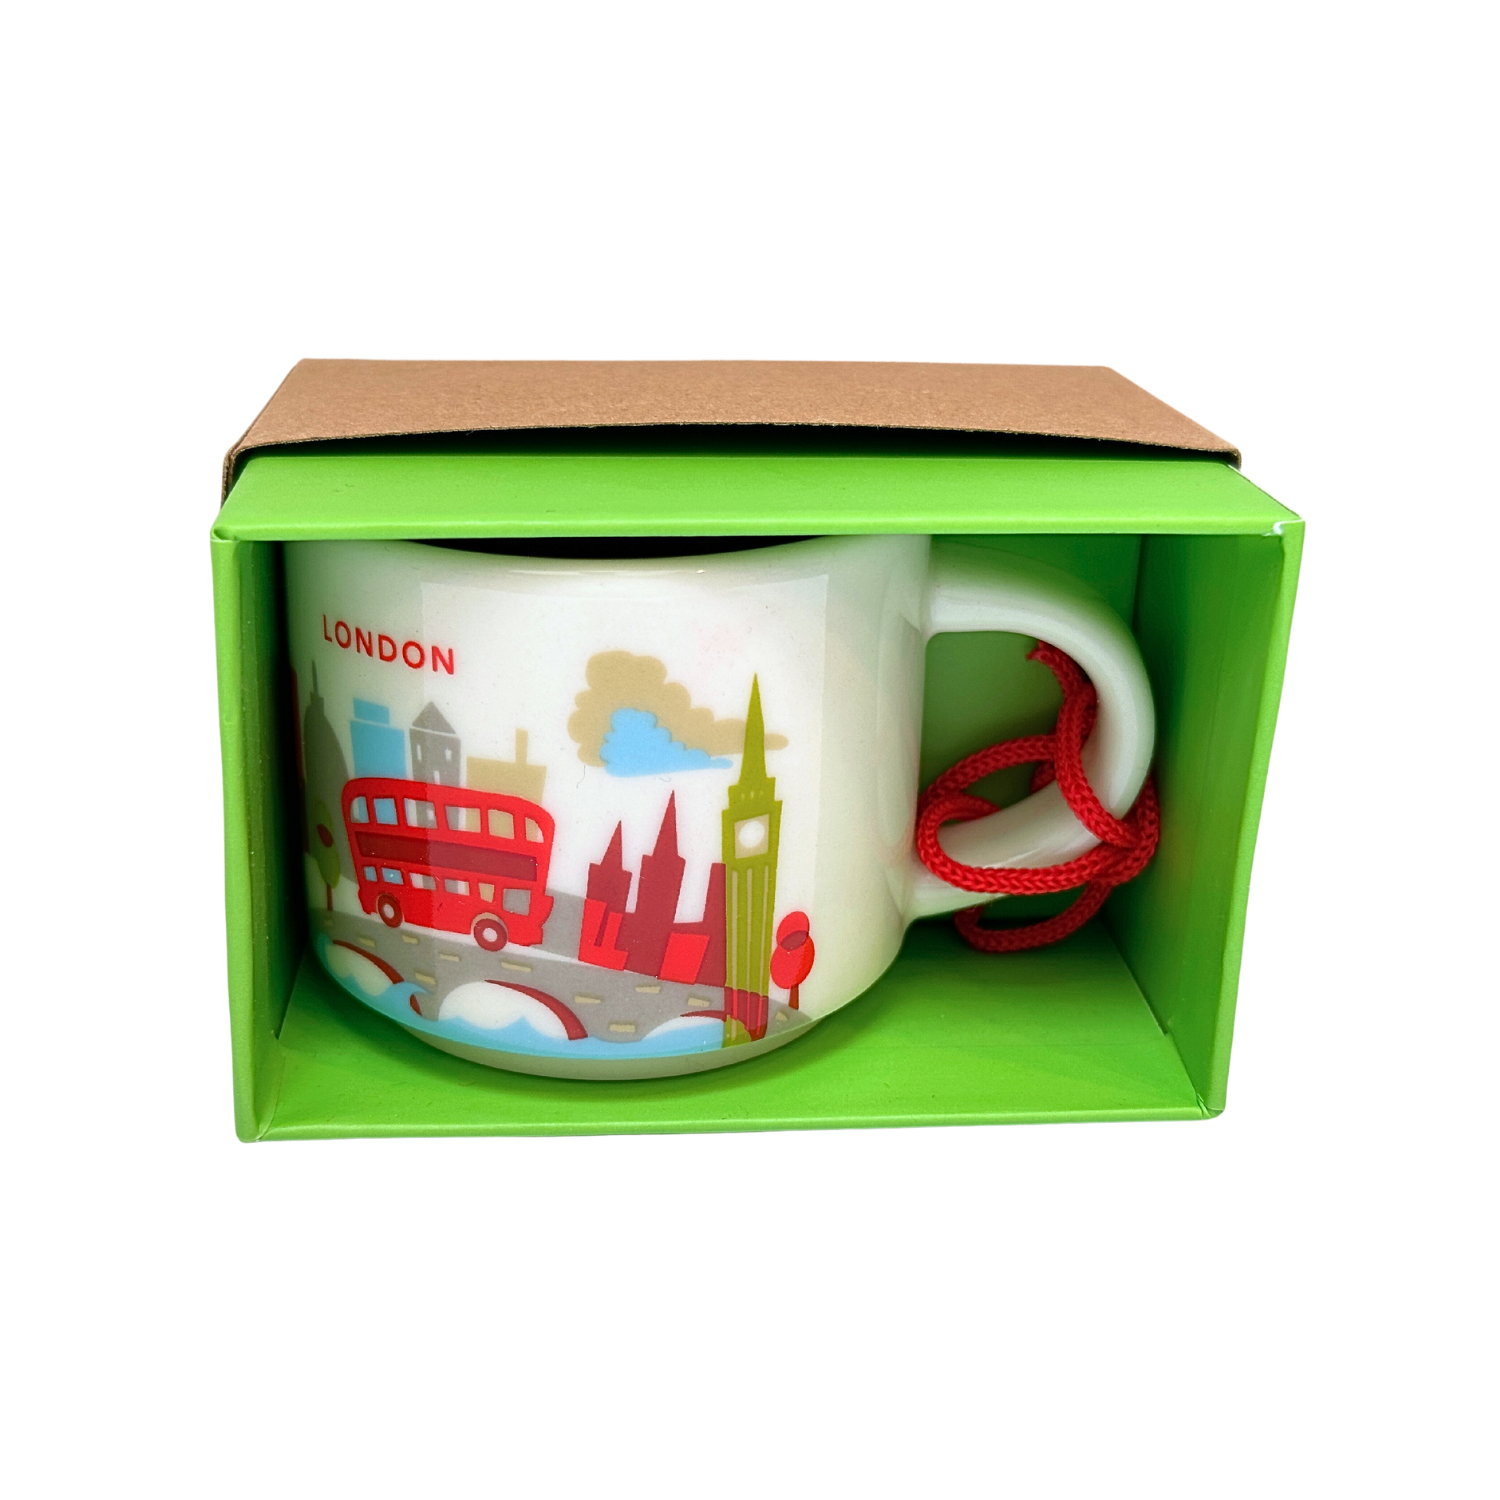 Starbucks You Are Here Collection London Ceramic Demitasse Cup, 2 Oz